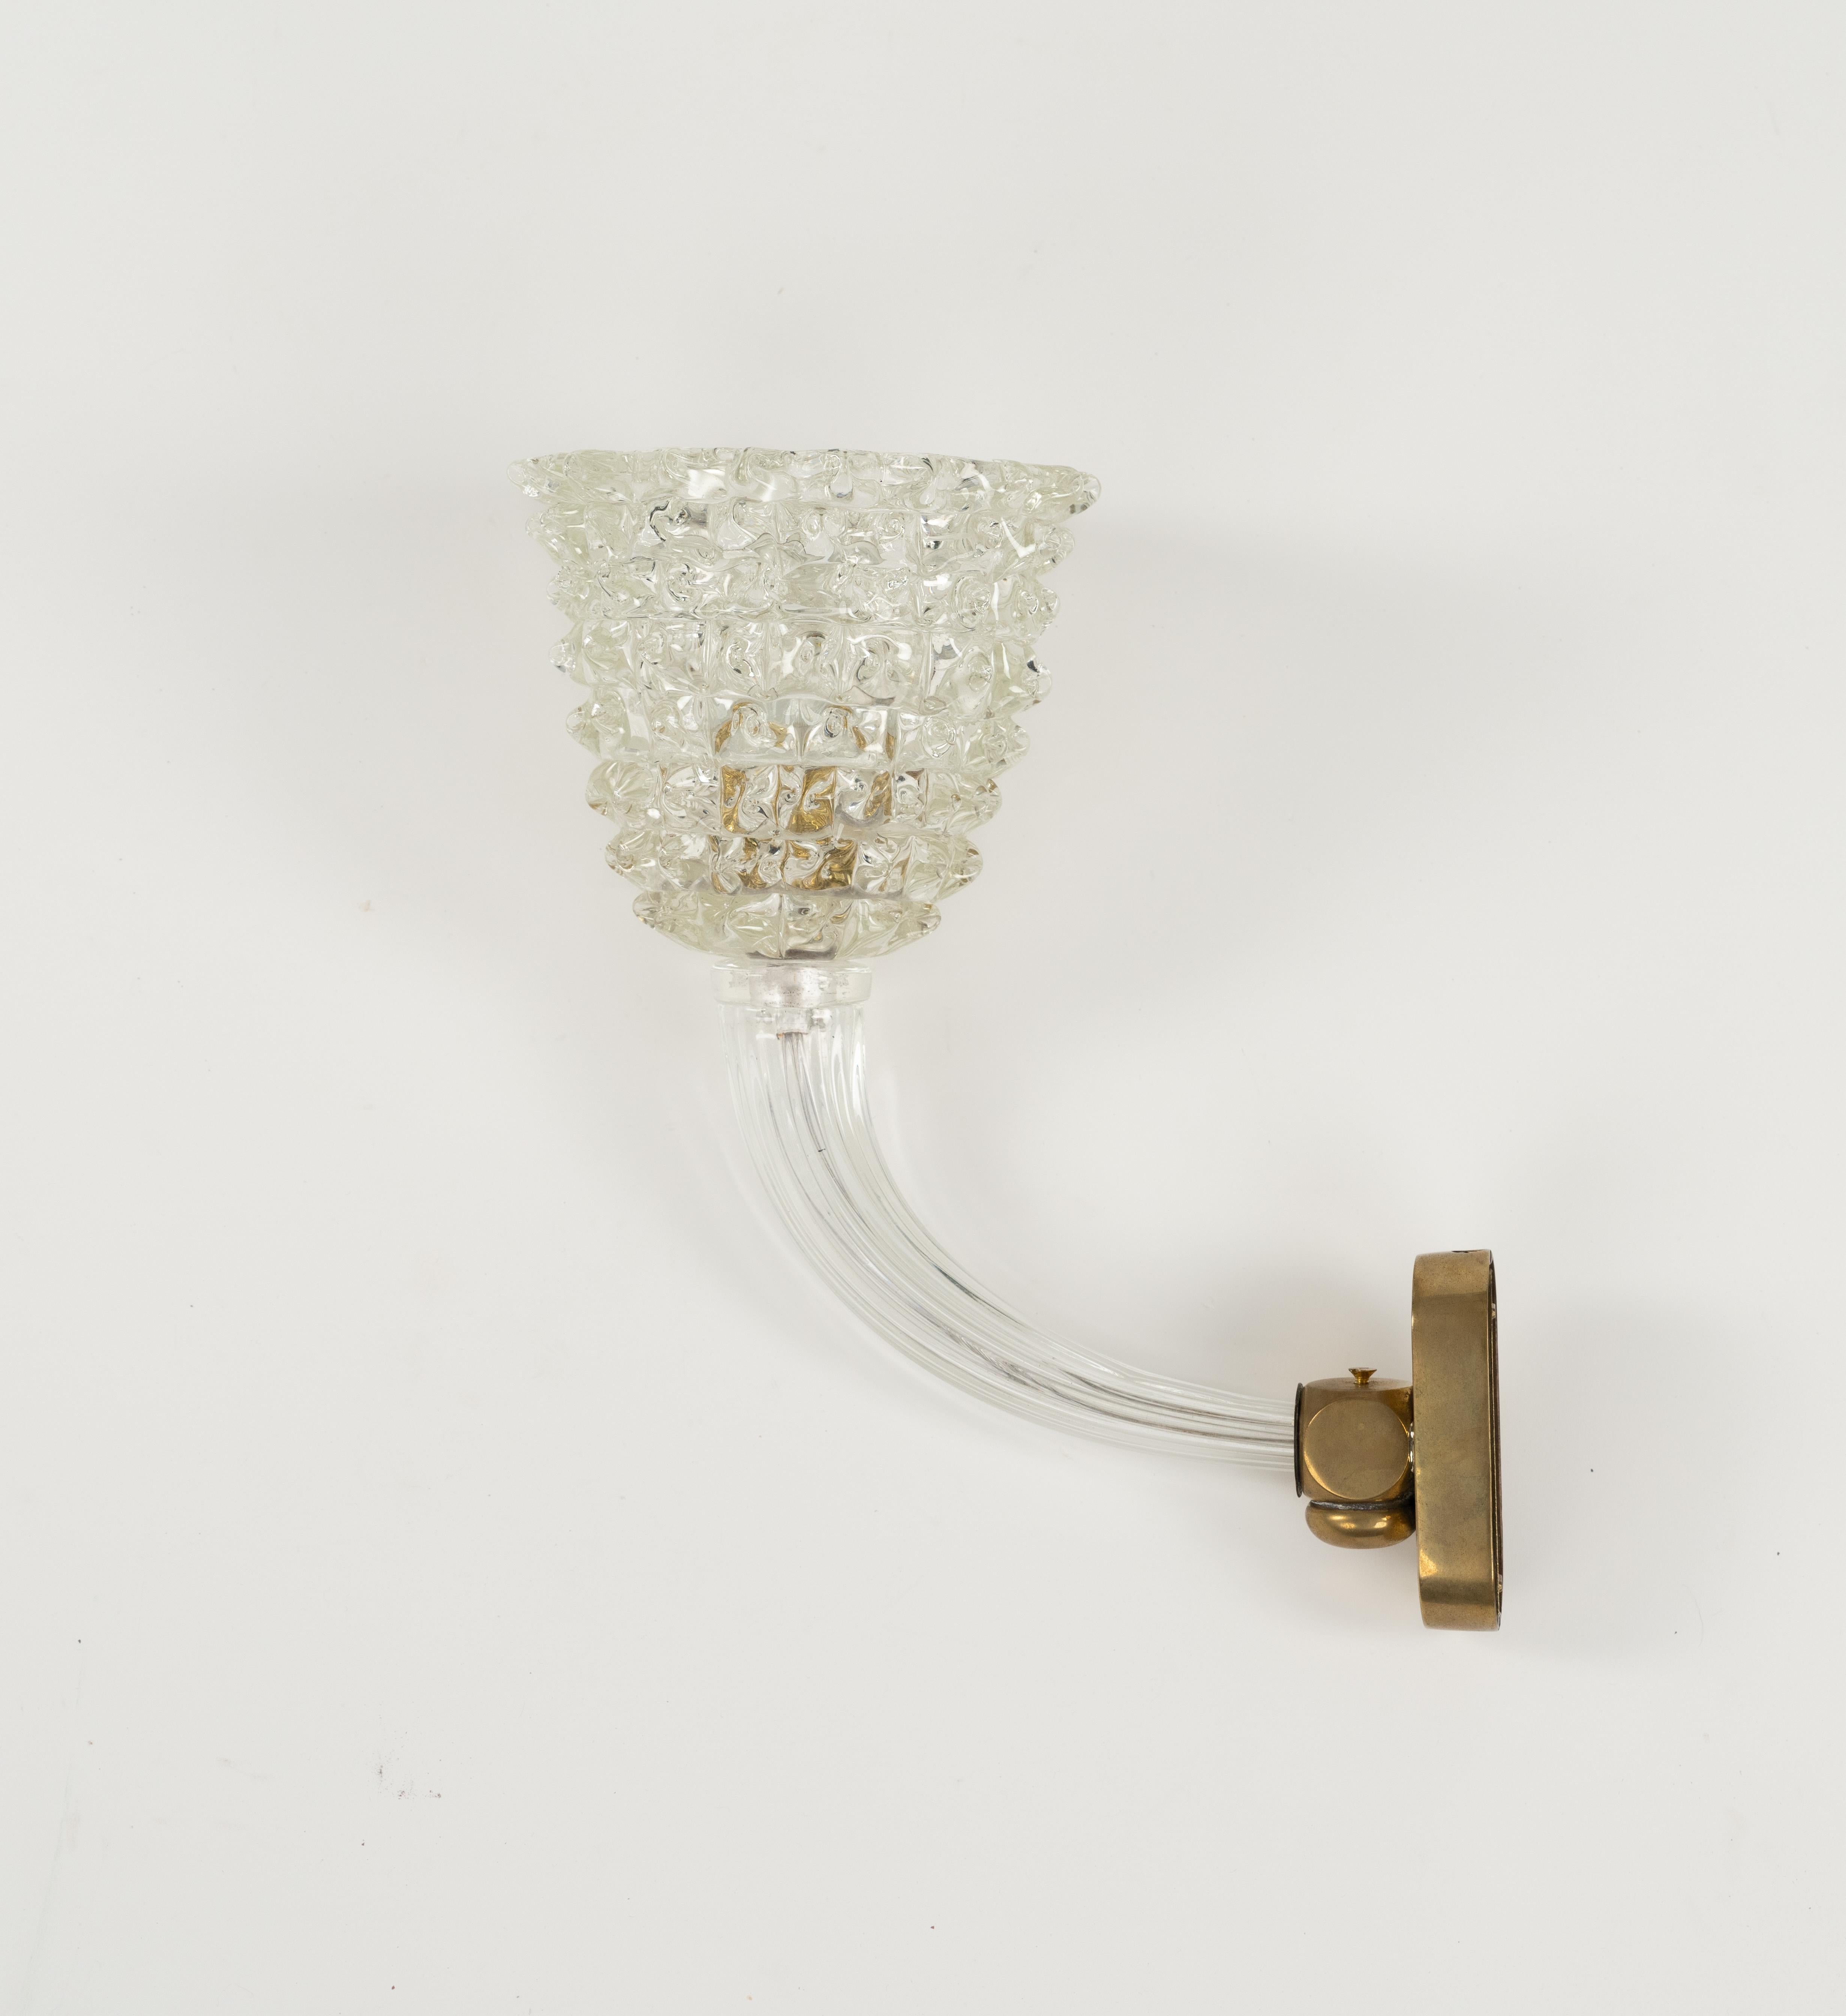 Mid-20th Century Pair of Sconces Rostrato Murano Glass & Brass Barovier & Toso Style, Italy 1950s For Sale